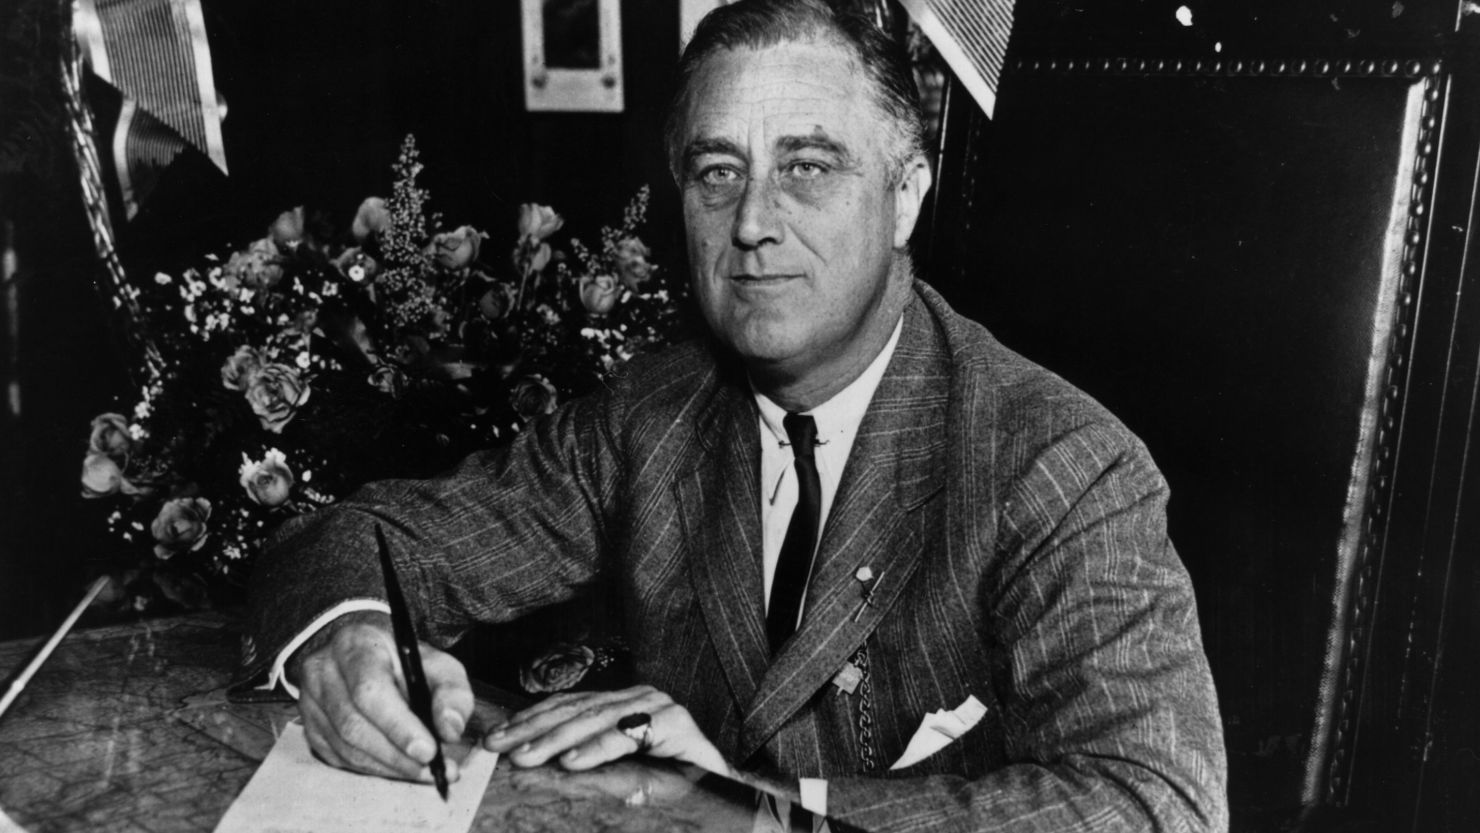 1936: Franklin Delano Roosevelt, the 32nd President of the United States.  (Photo by Keystone Features/Getty Images)